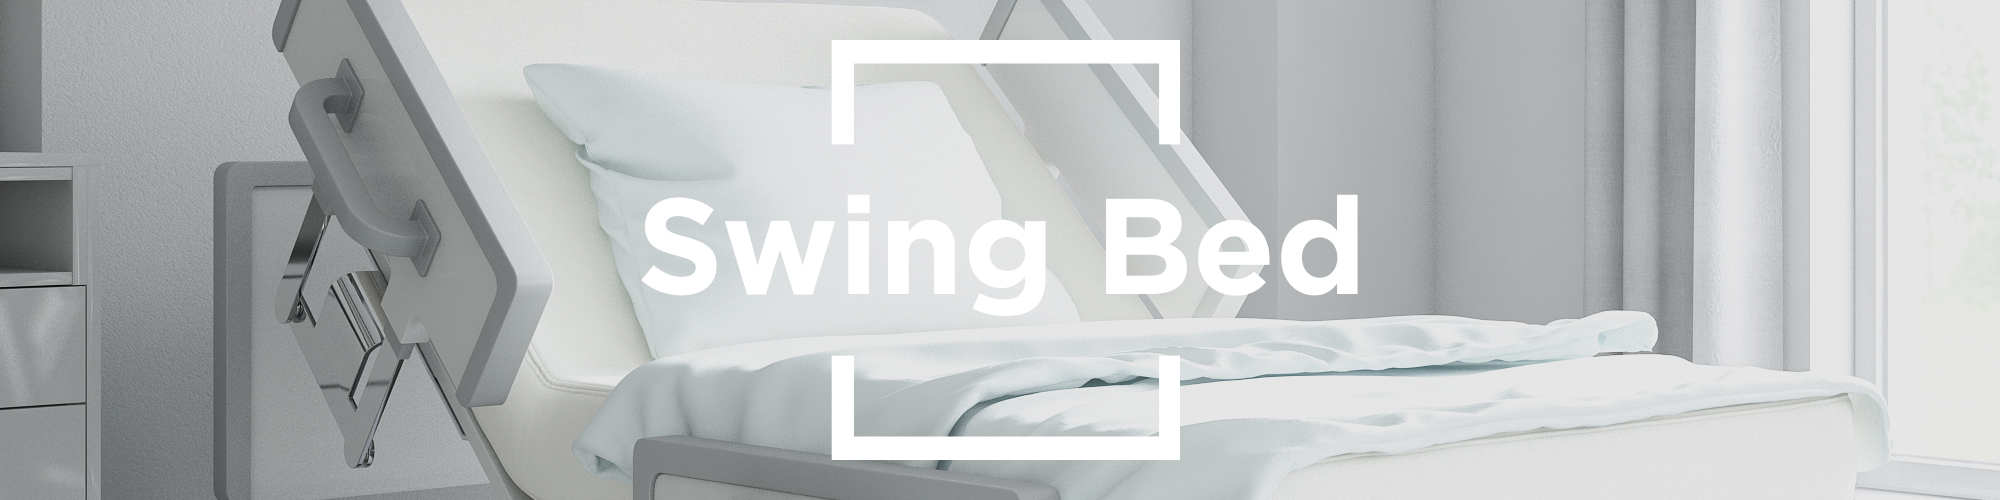 Swing Bed Patient Experience Surveys